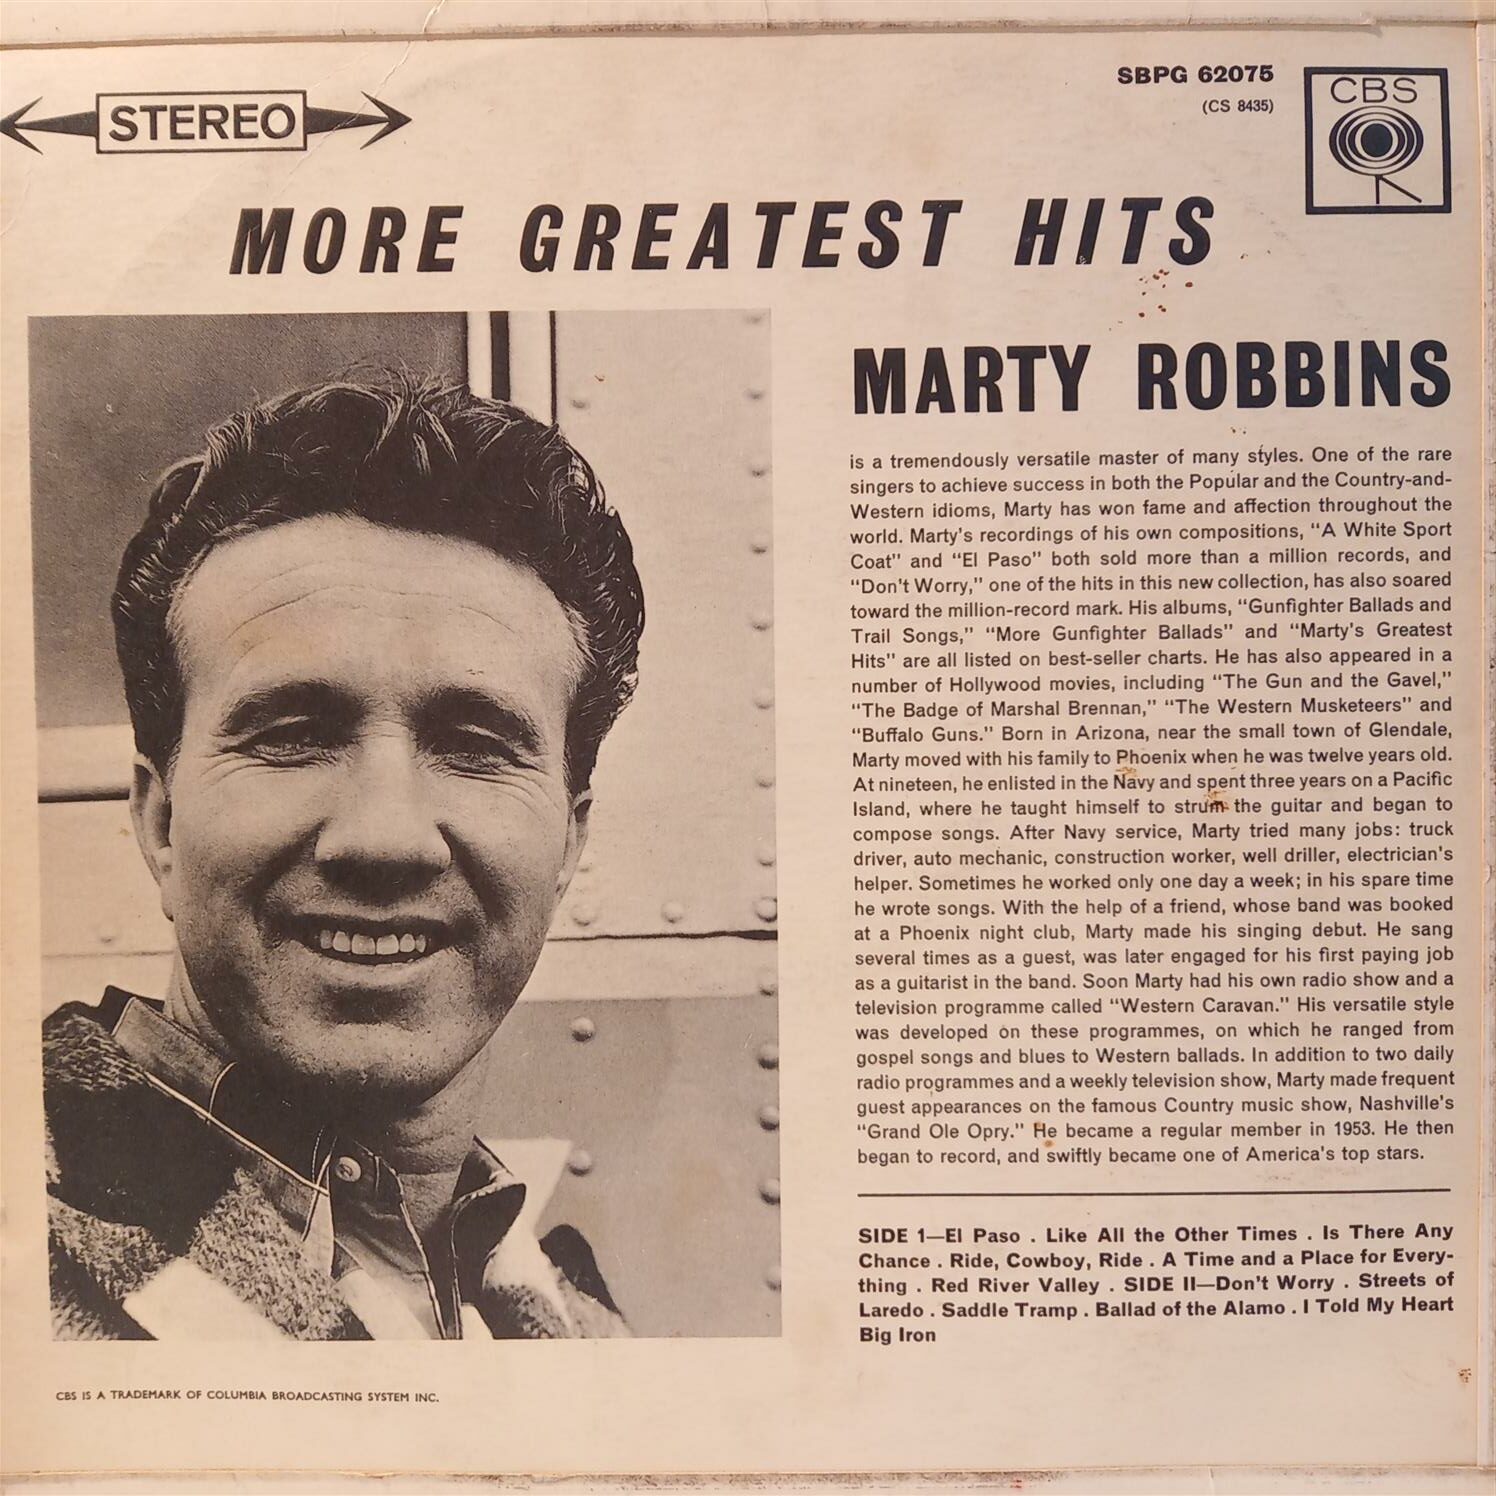 MARTY ROBBINS – MORE GREATEST HITS ARKA